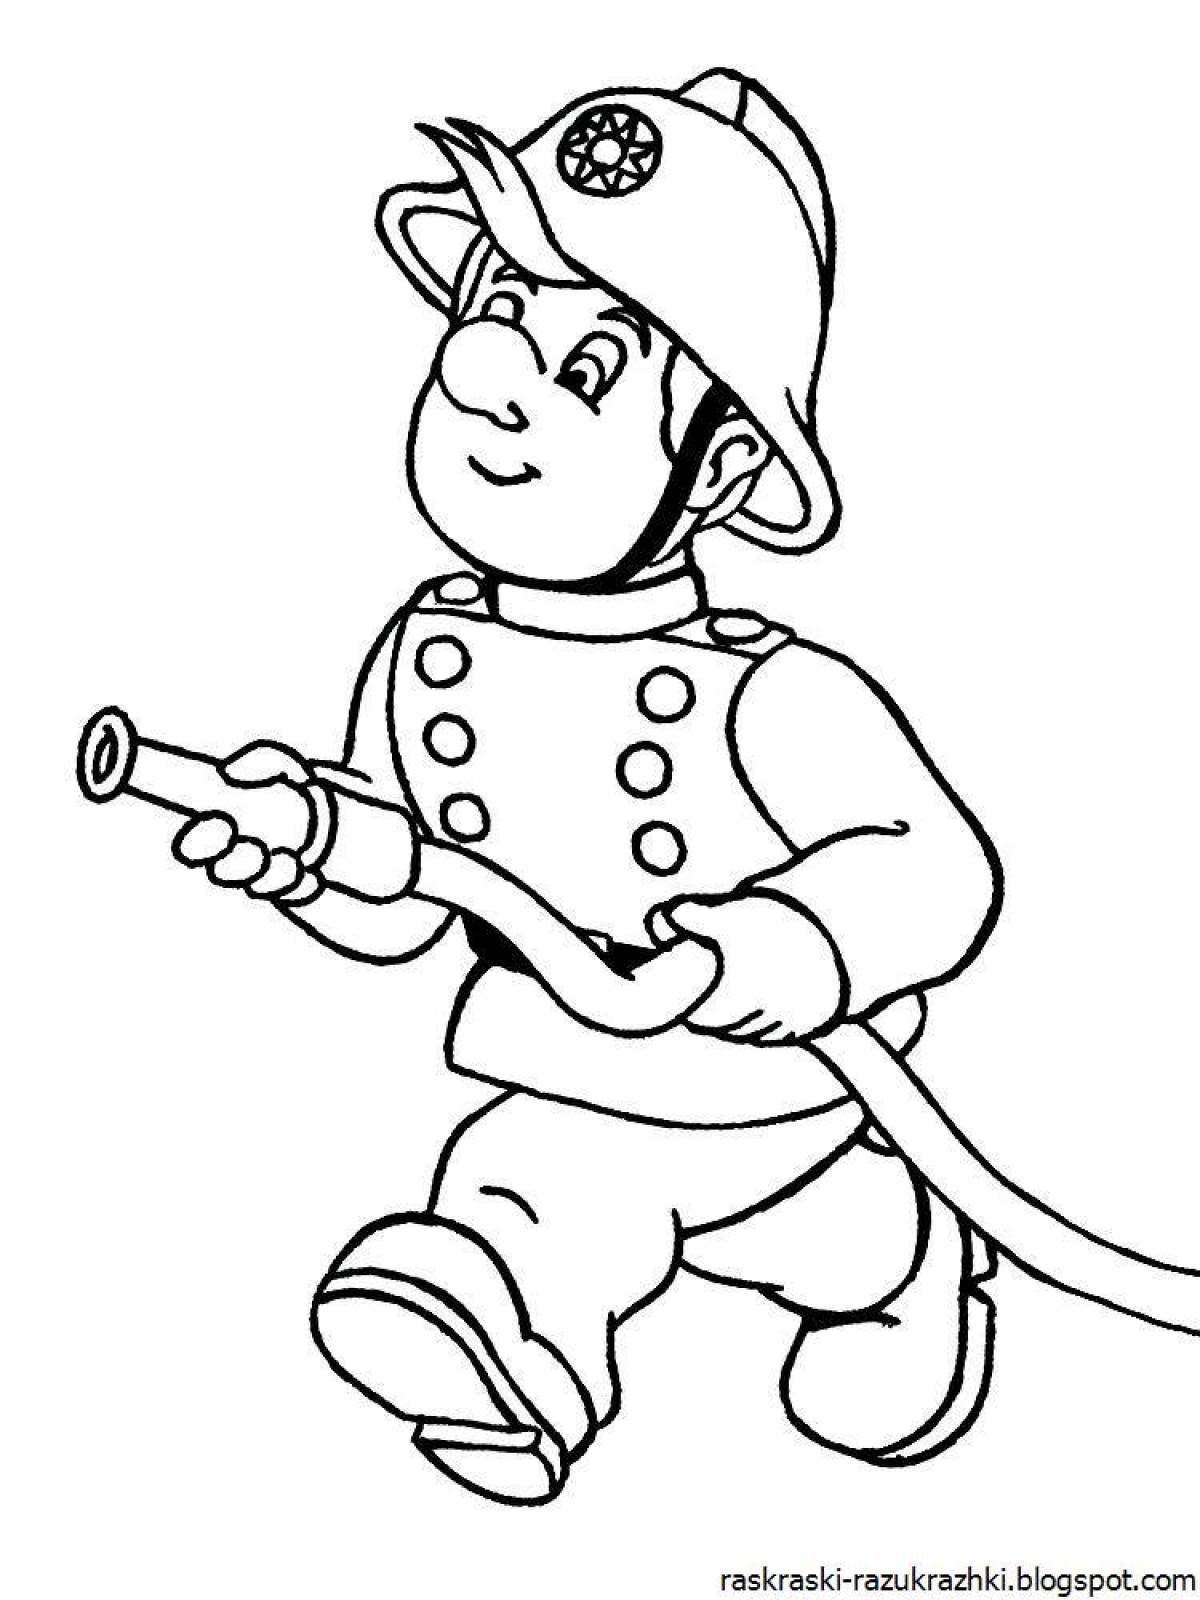 Funny job coloring pages for 5-6 year olds